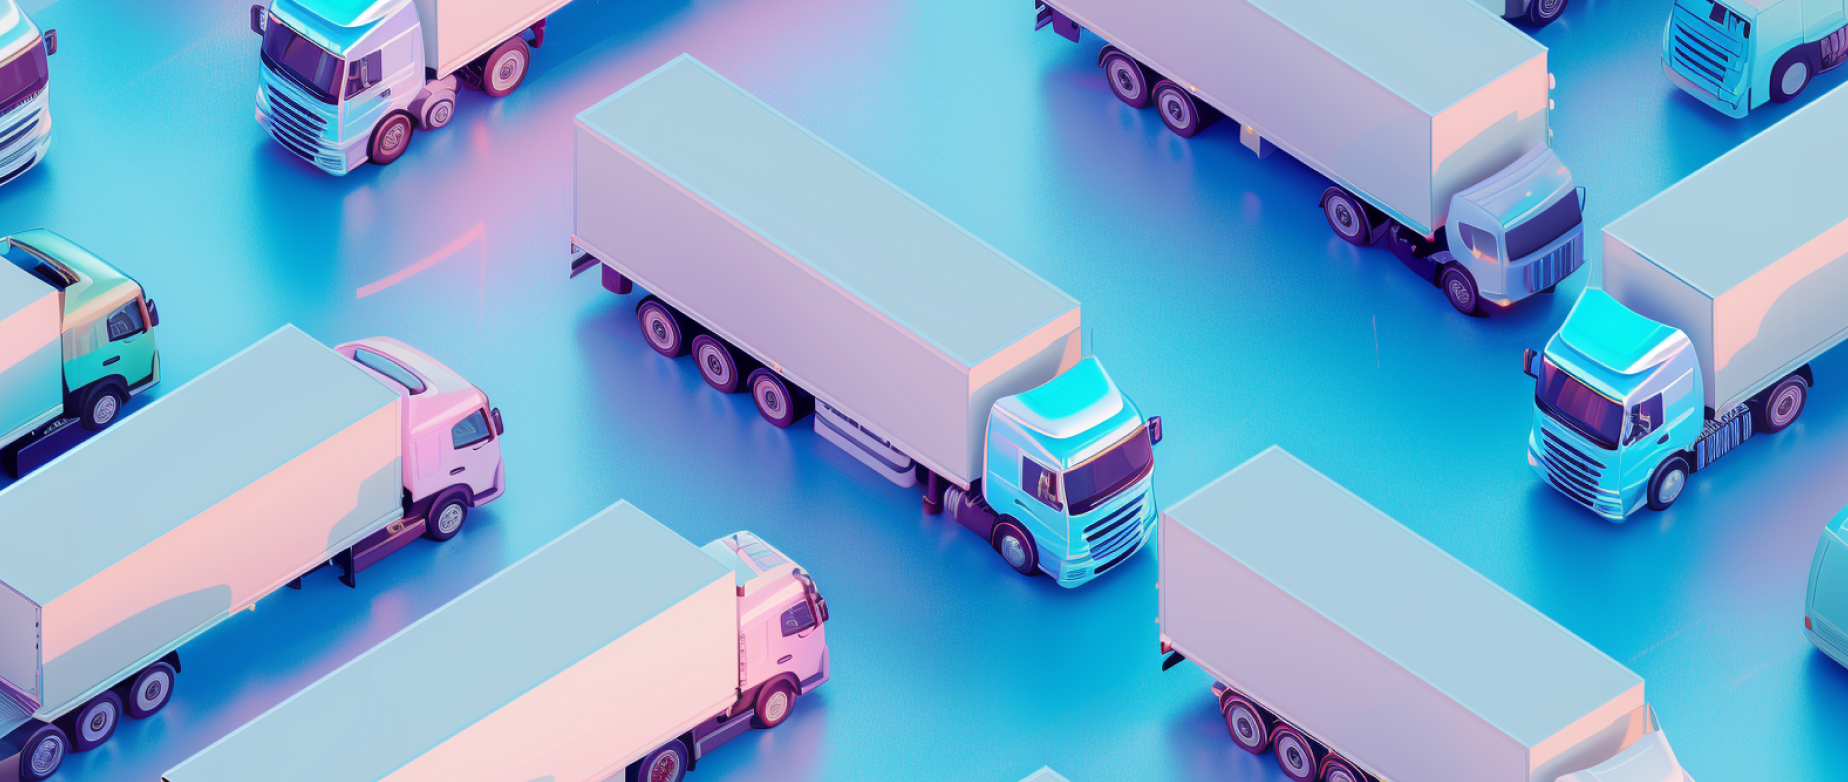 Transport trucks that could be used by dropshipping suppliers.